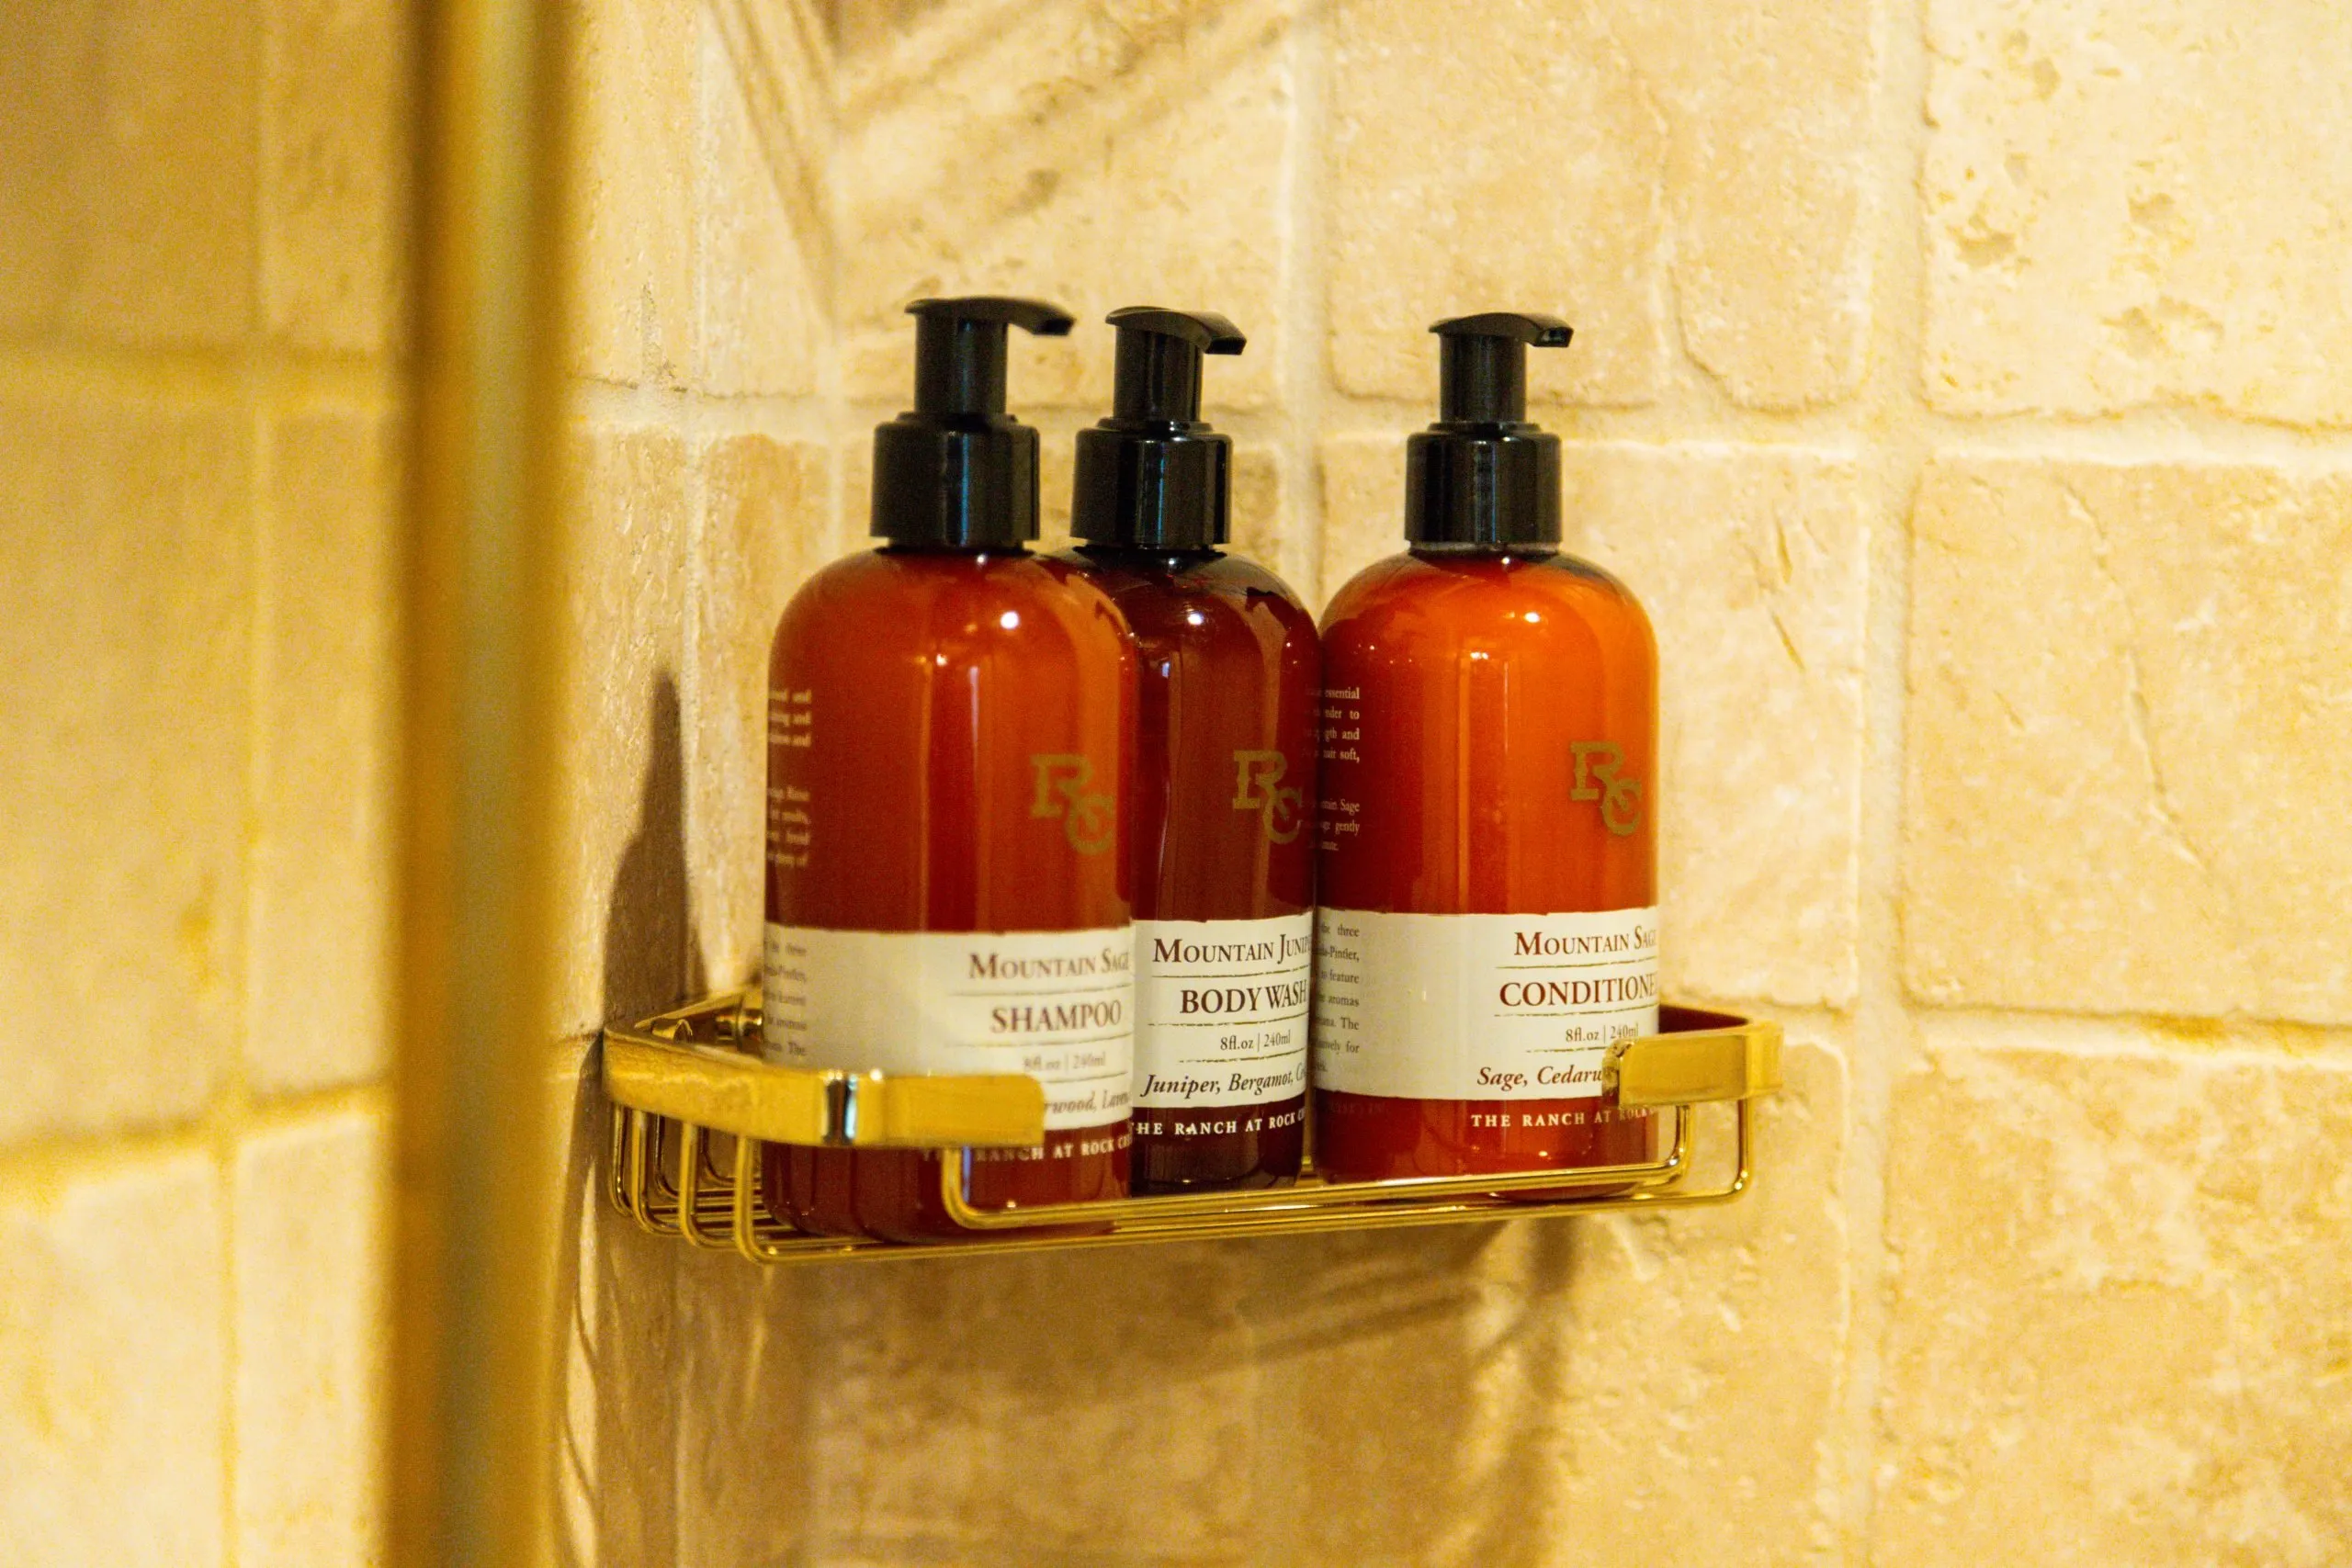 Bottles of shampoo, body wash and conditioner